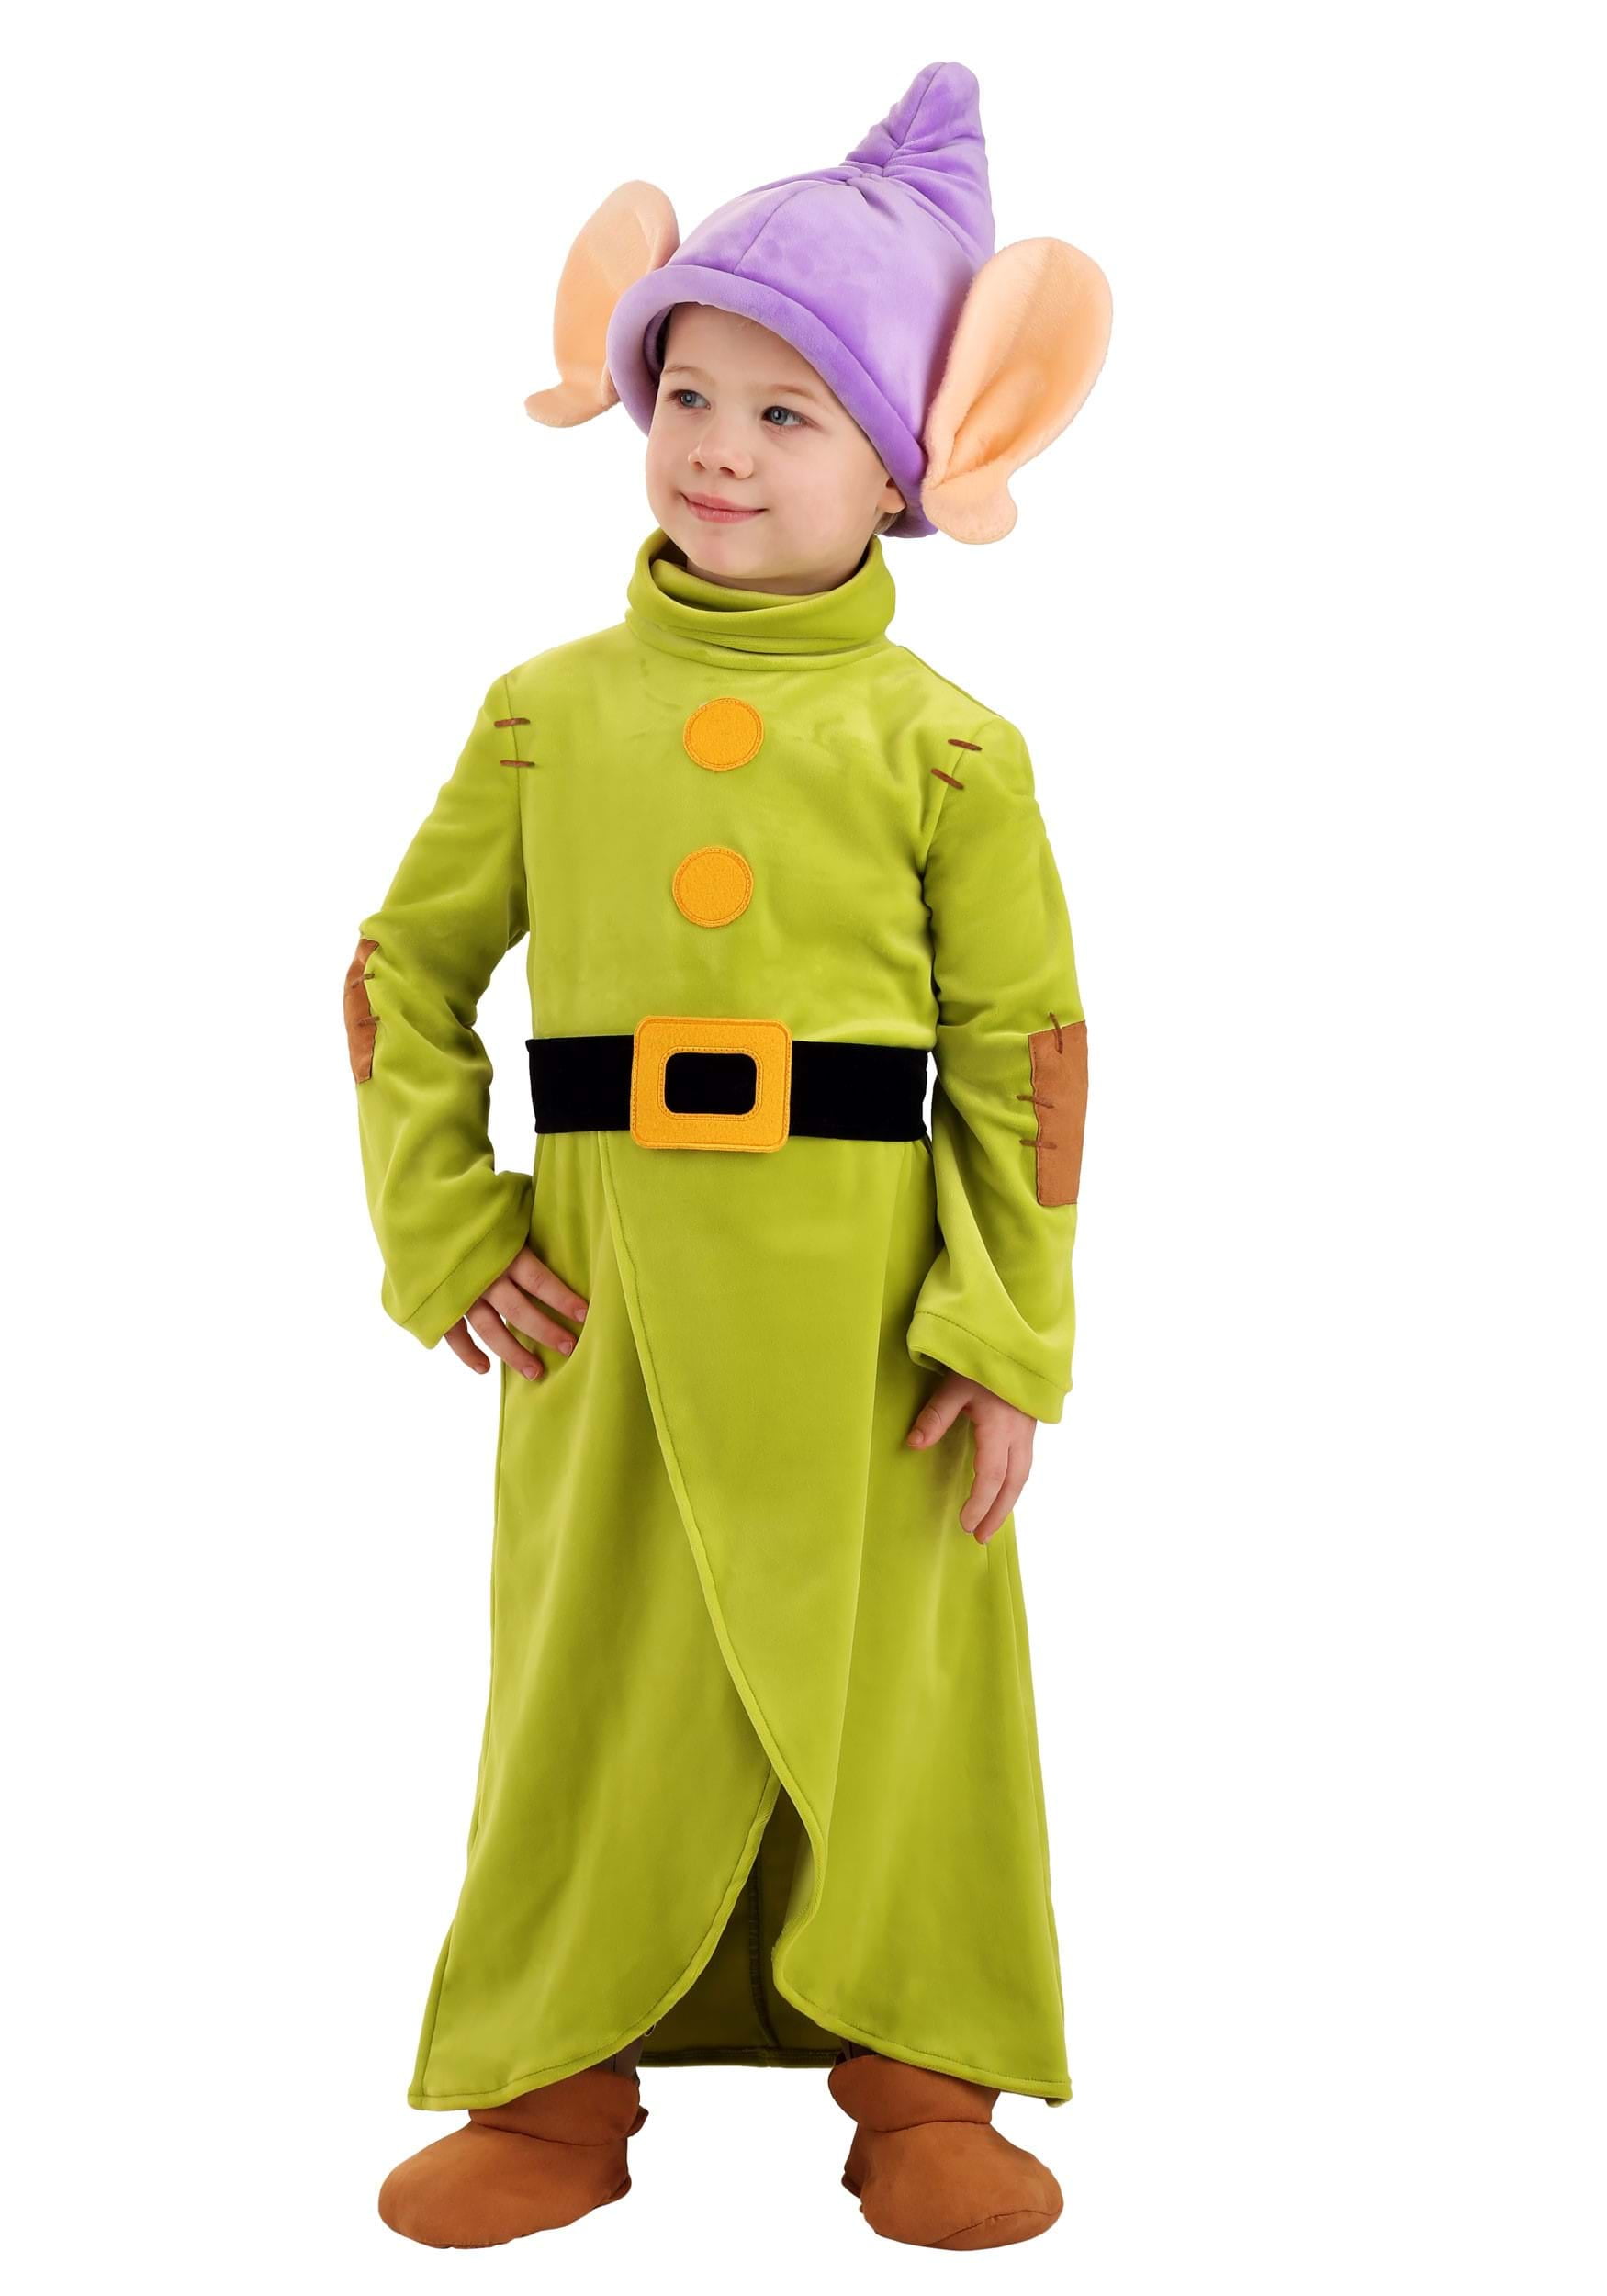 Adult Sizes Bashful Dwarf Costume Set Teen Toddler Baby Kids Snow White and the Seven Dwarfs 